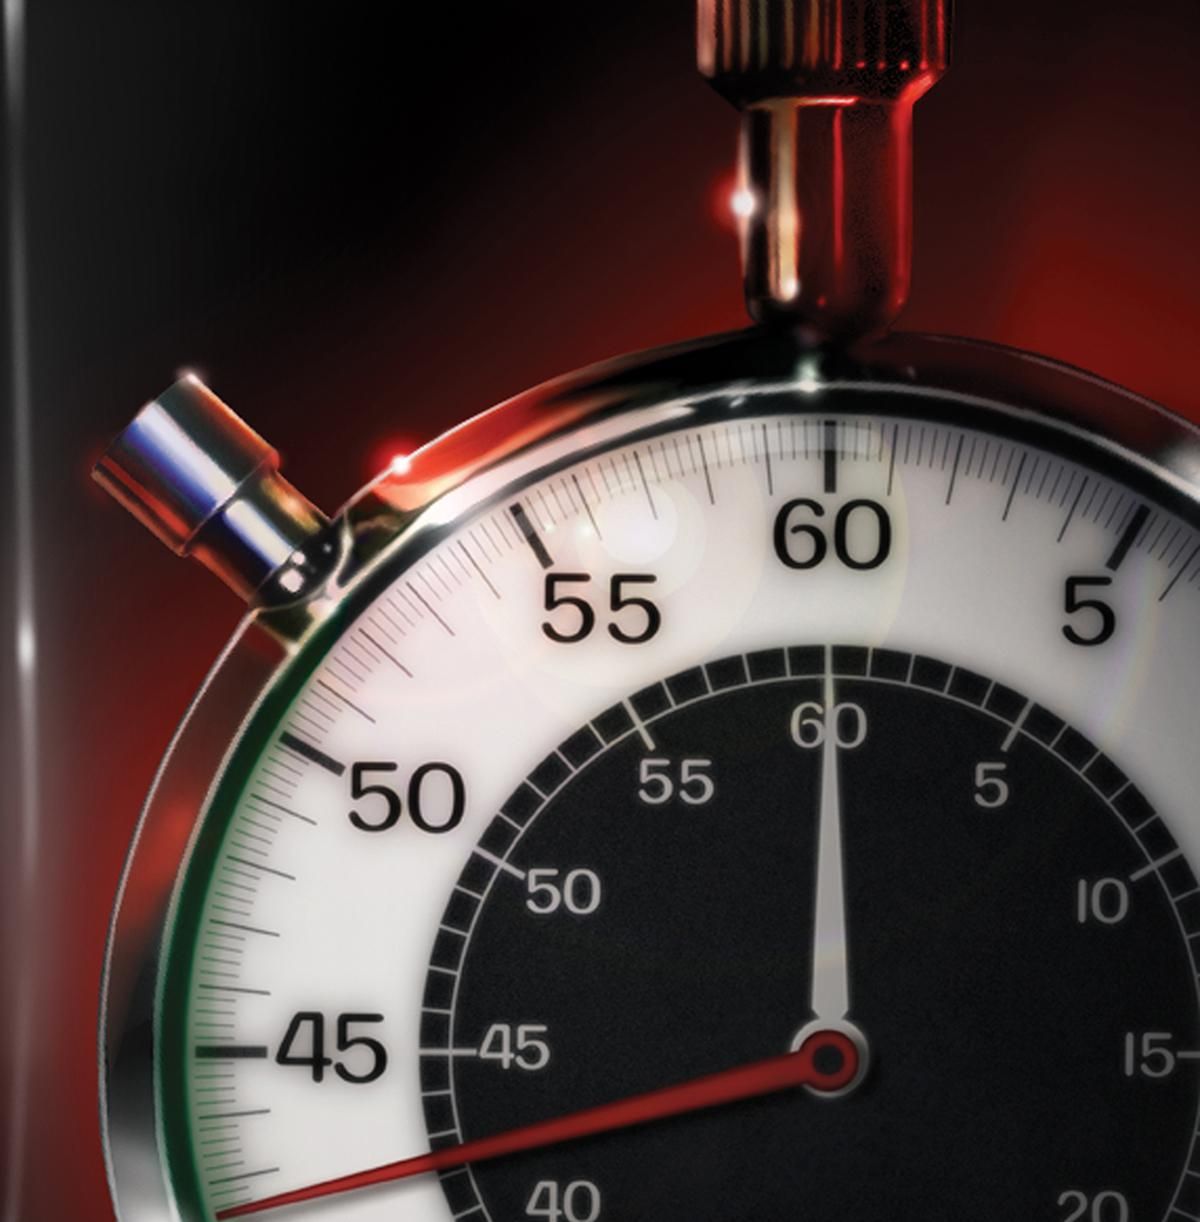 Stock image of a stopwatch face against a red background.